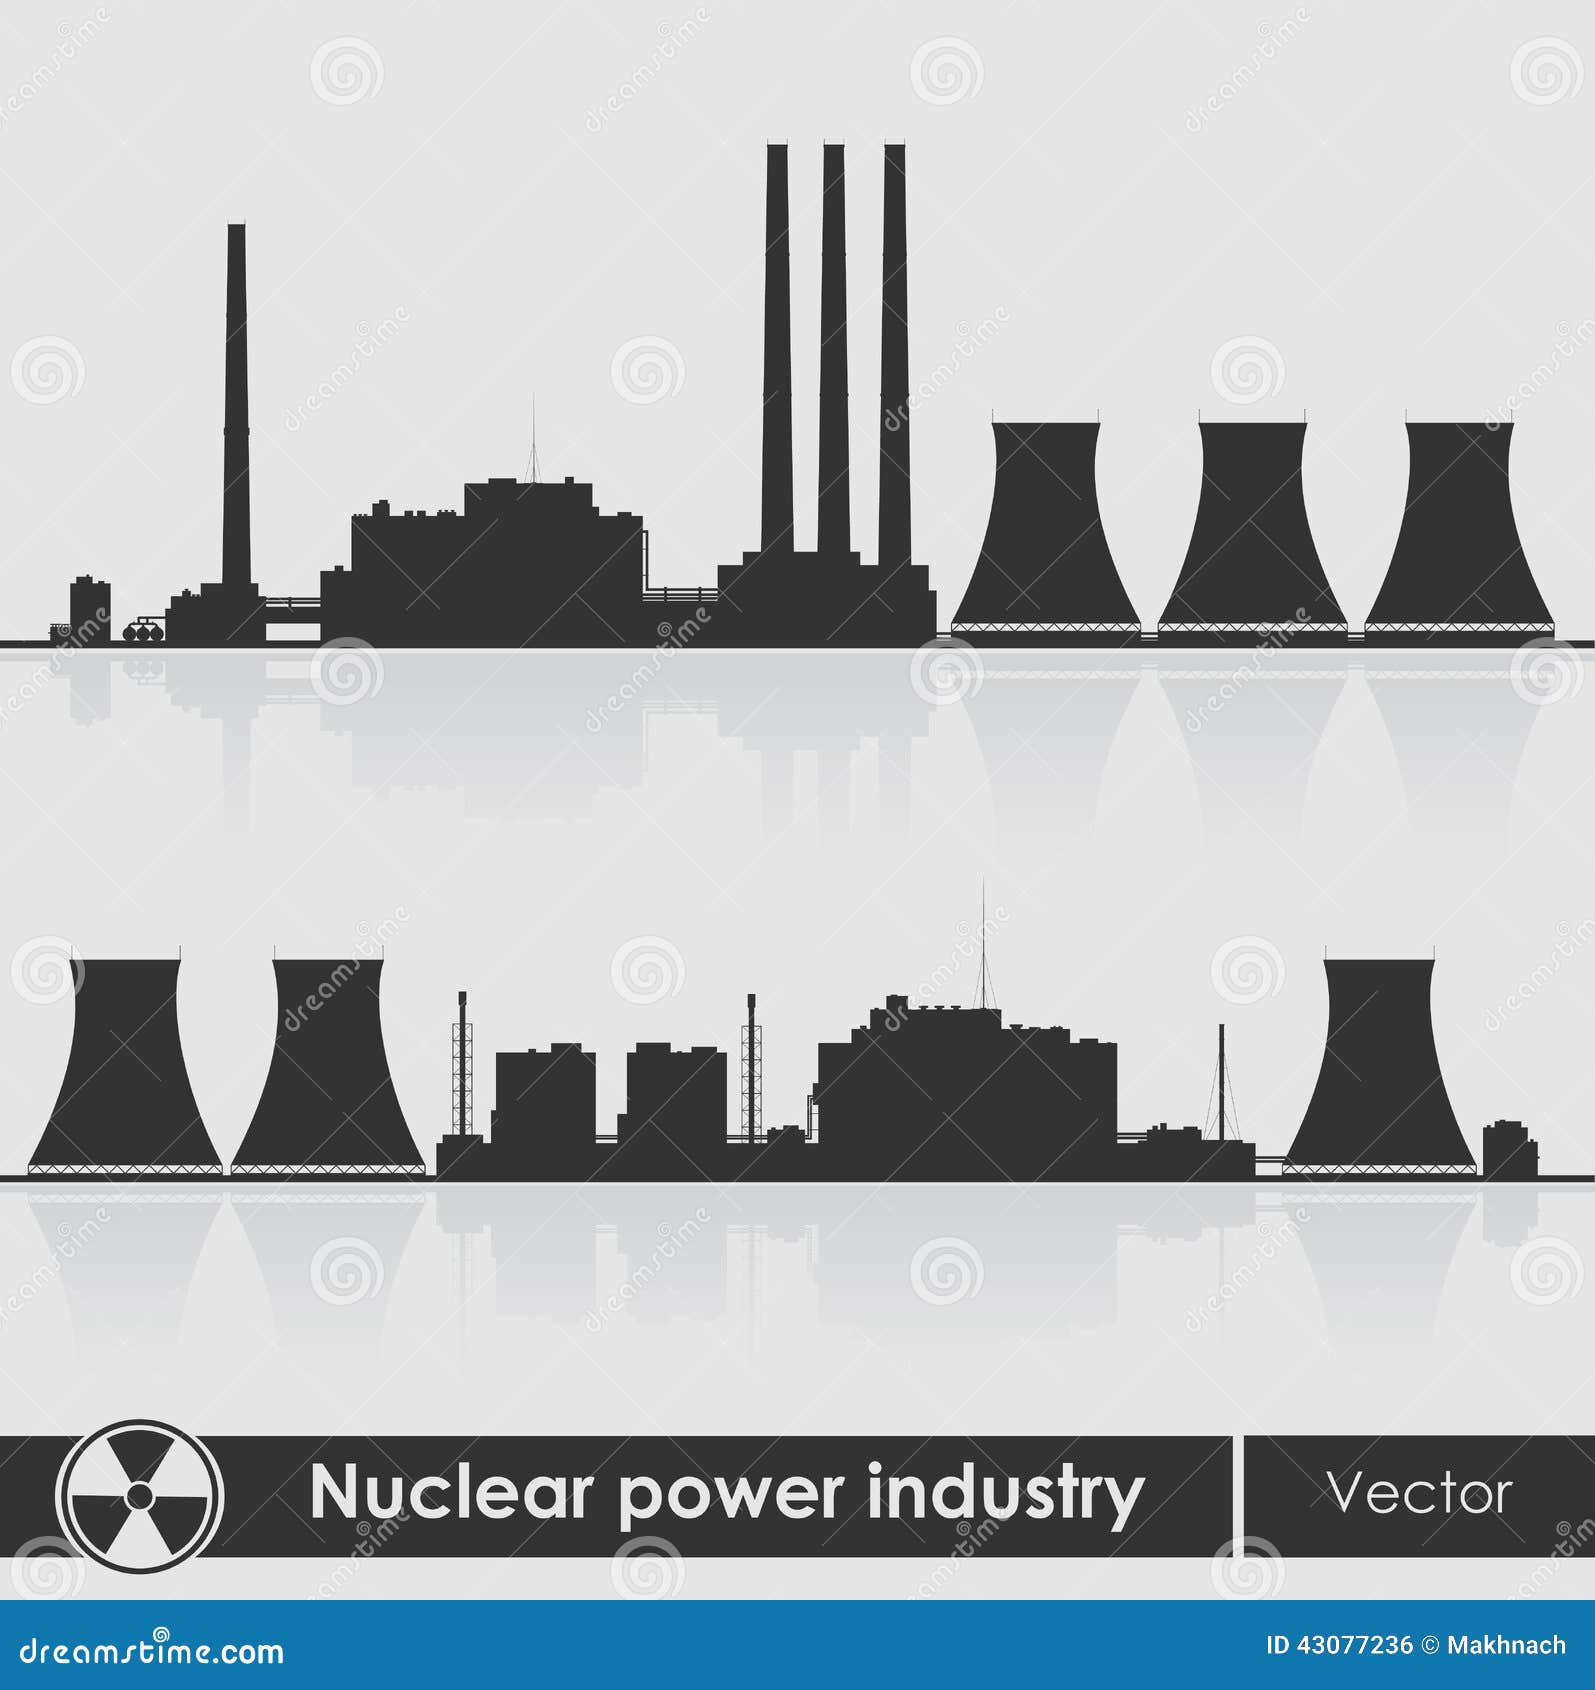 clipart of nuclear power plant - photo #31